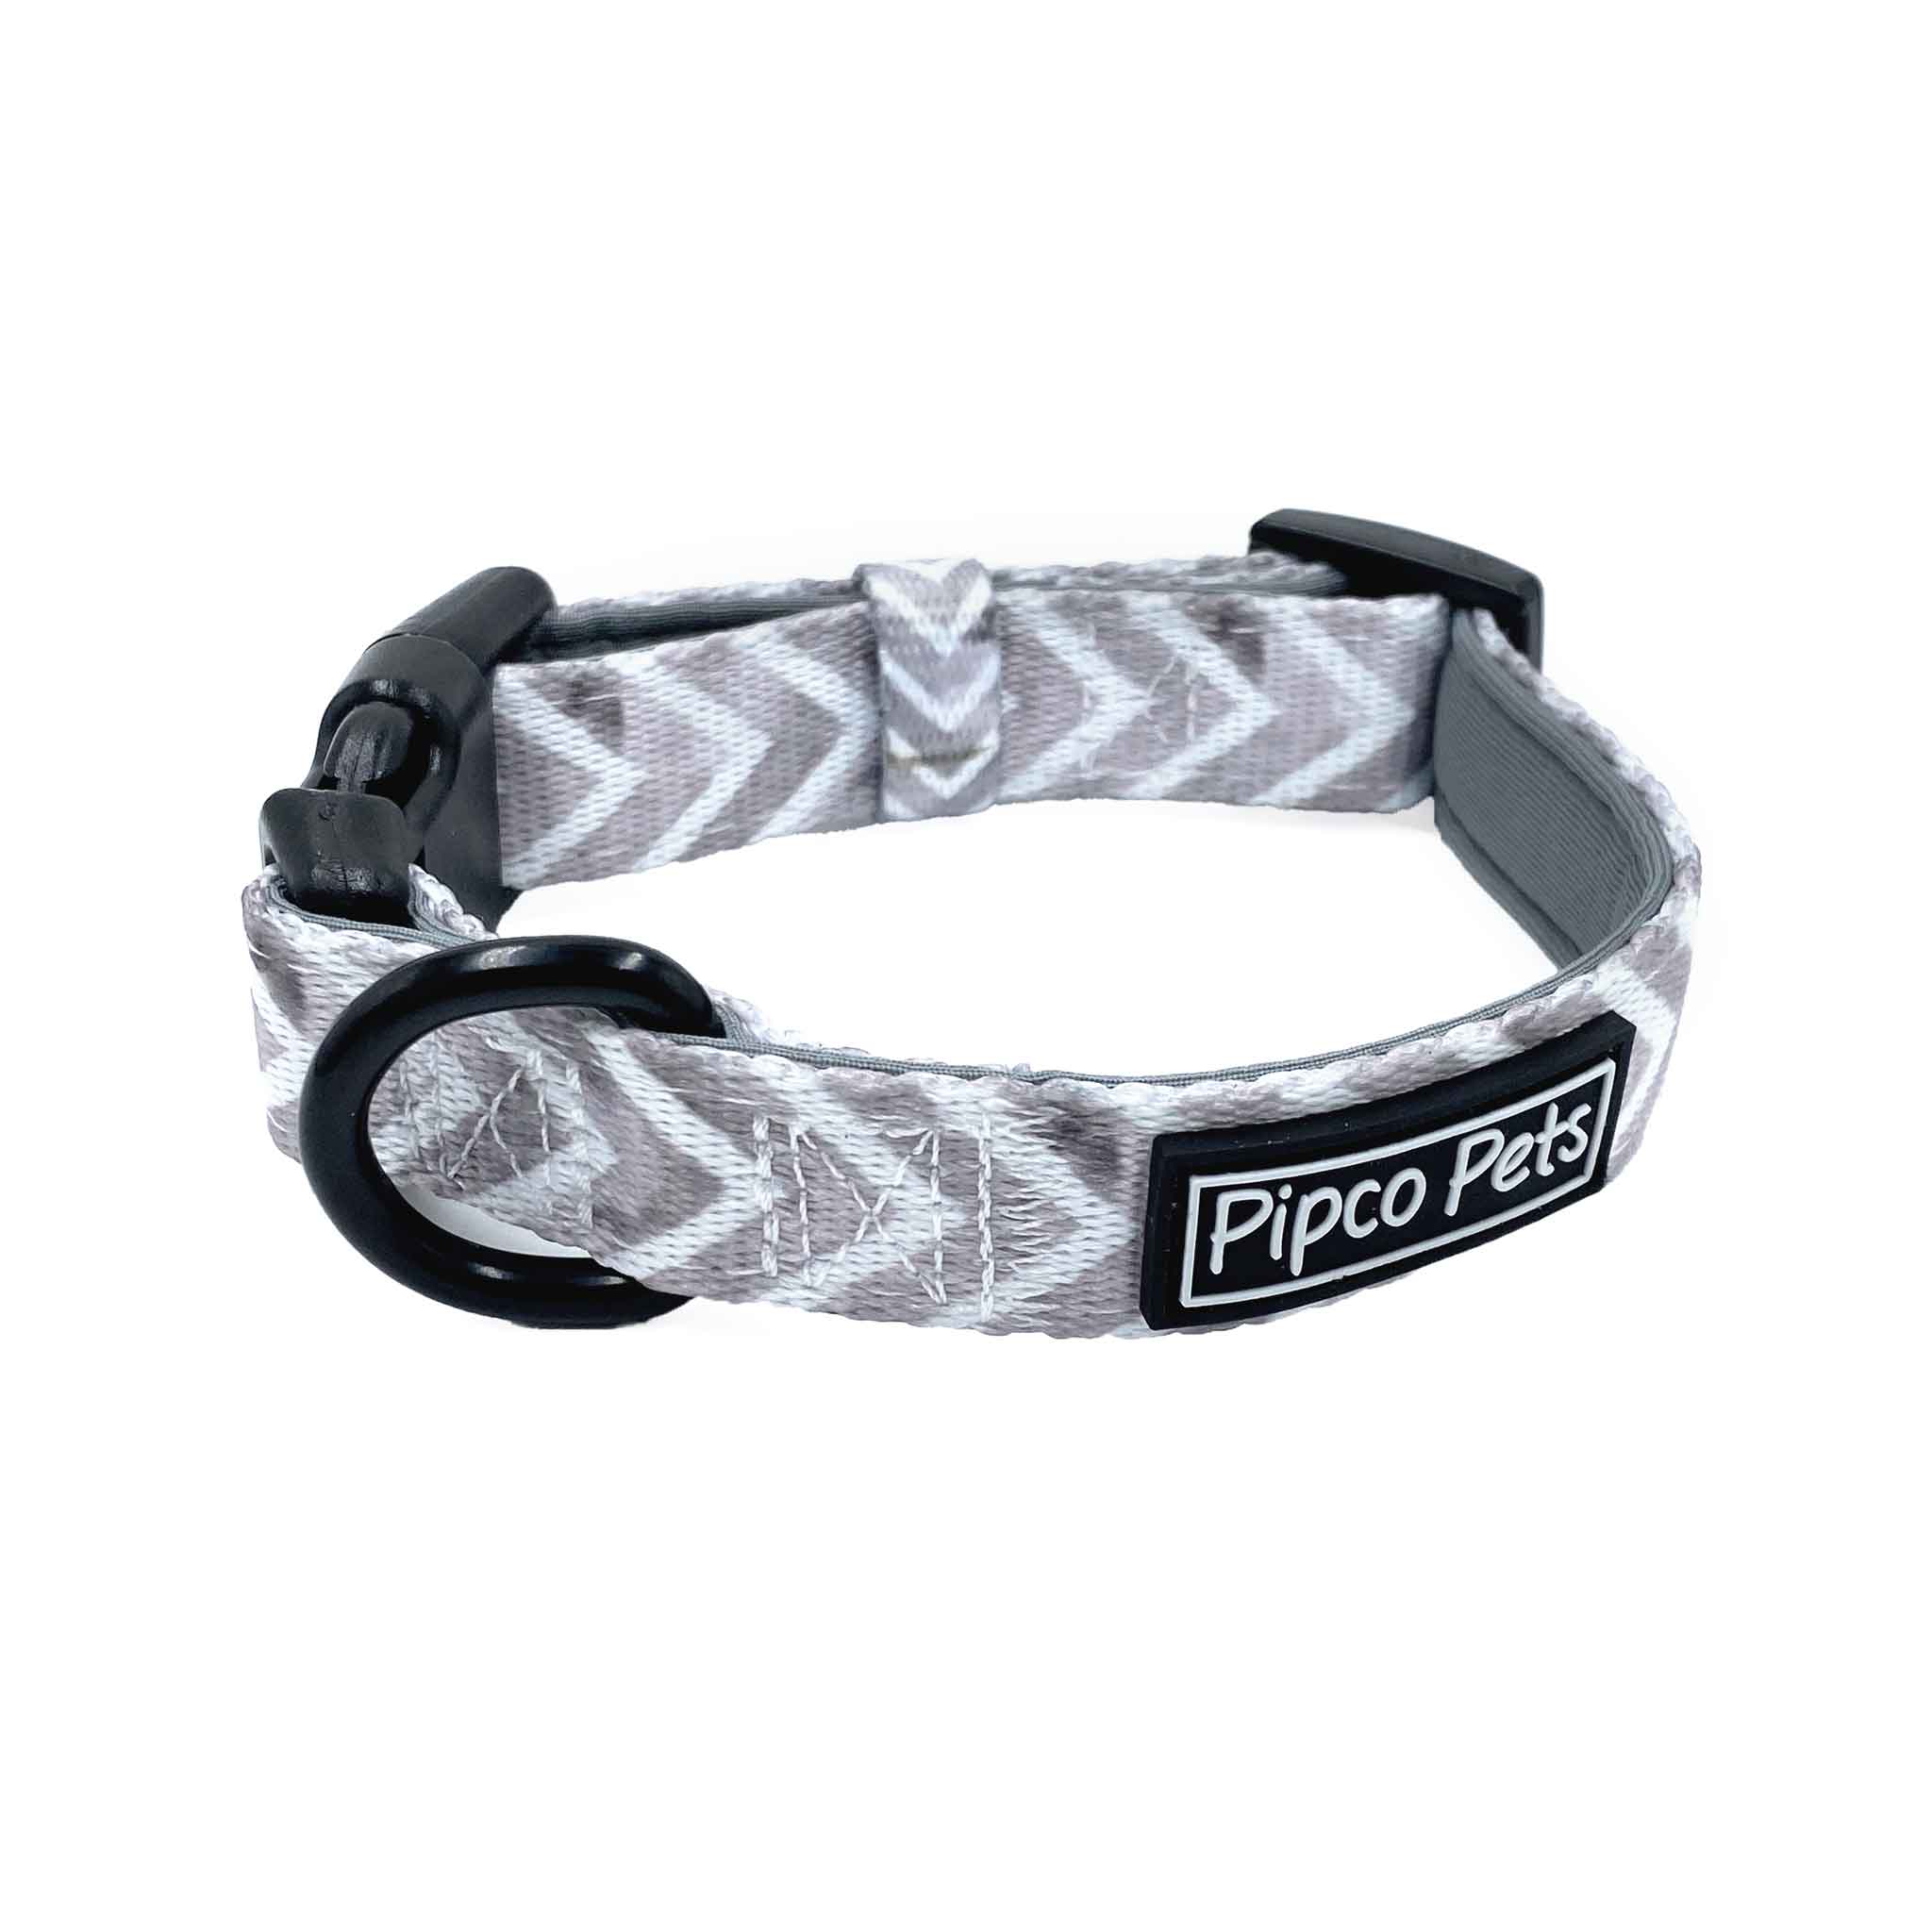 Pipco Pets dog collar with grey Zig Zags pattern